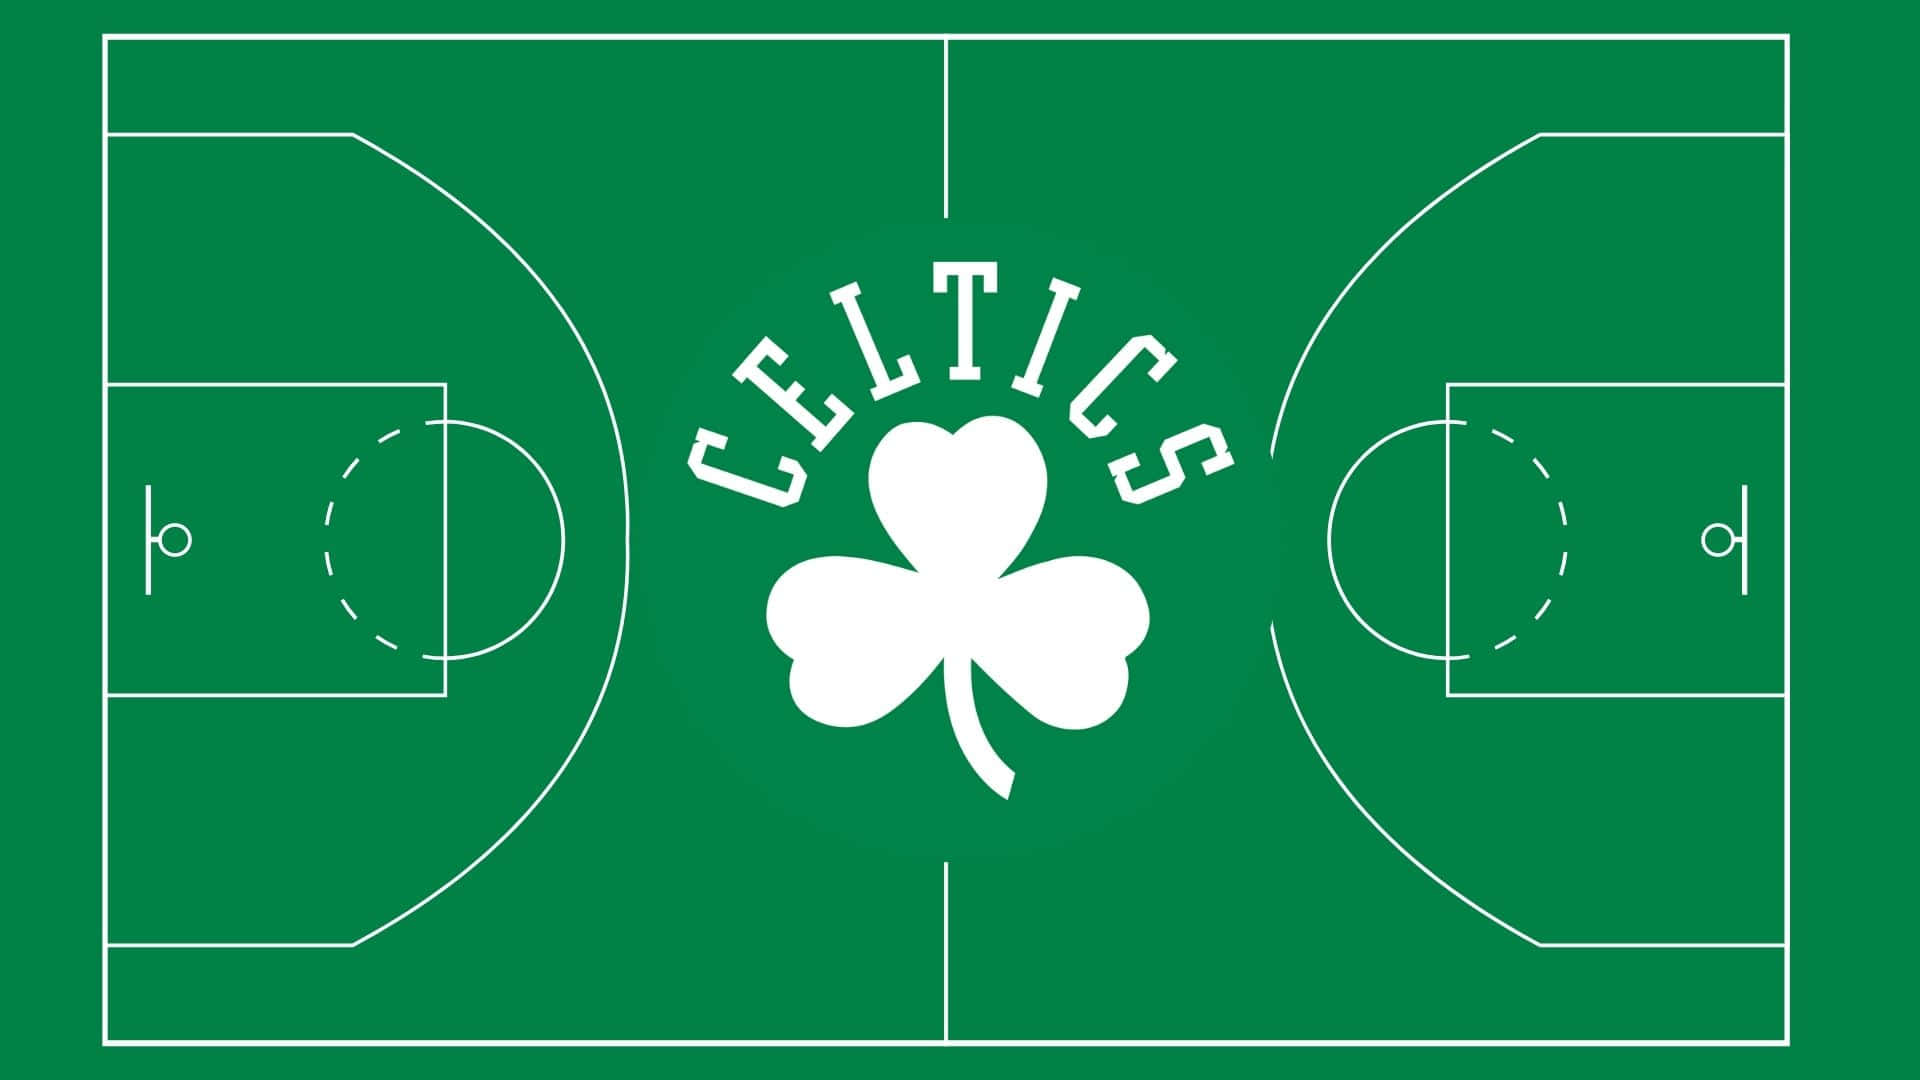 The Boston Celtics unify as one to conquer their next win. Wallpaper